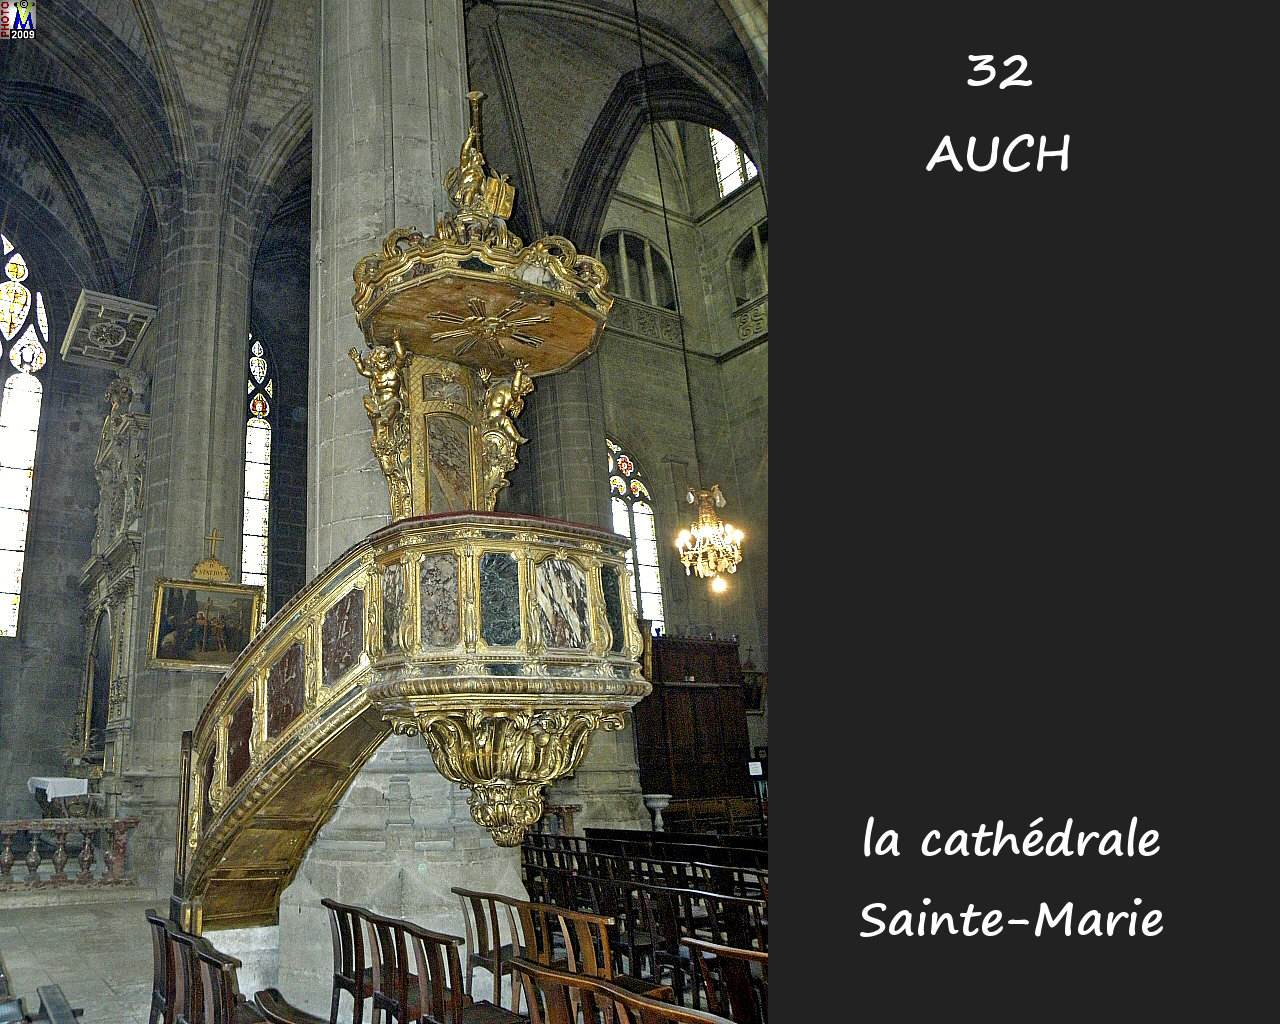 32AUCH_cathedrale_256.jpg